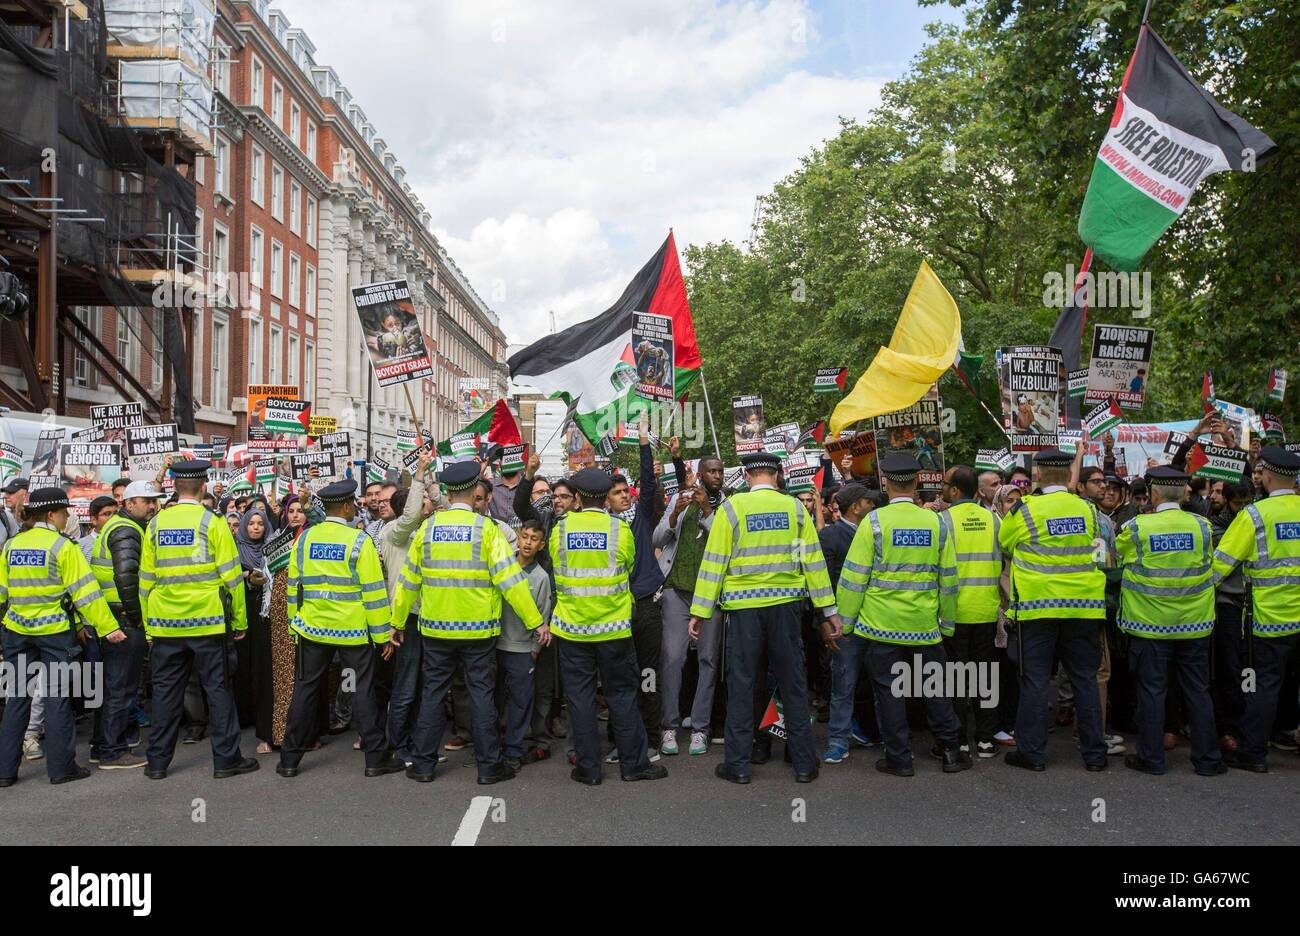 Police contain pro-Palestinian supporters as they take part in a rally in central London, to commemorate Al-Quds Day, a day that has been marked globally since being inaugurated in 1979 by Ayatollah Khomeini who asked for the last Friday in the Islamic holy month of Ramadan to be set aside as a day for uniting against Israel and showing support for Palestinians. Stock Photo